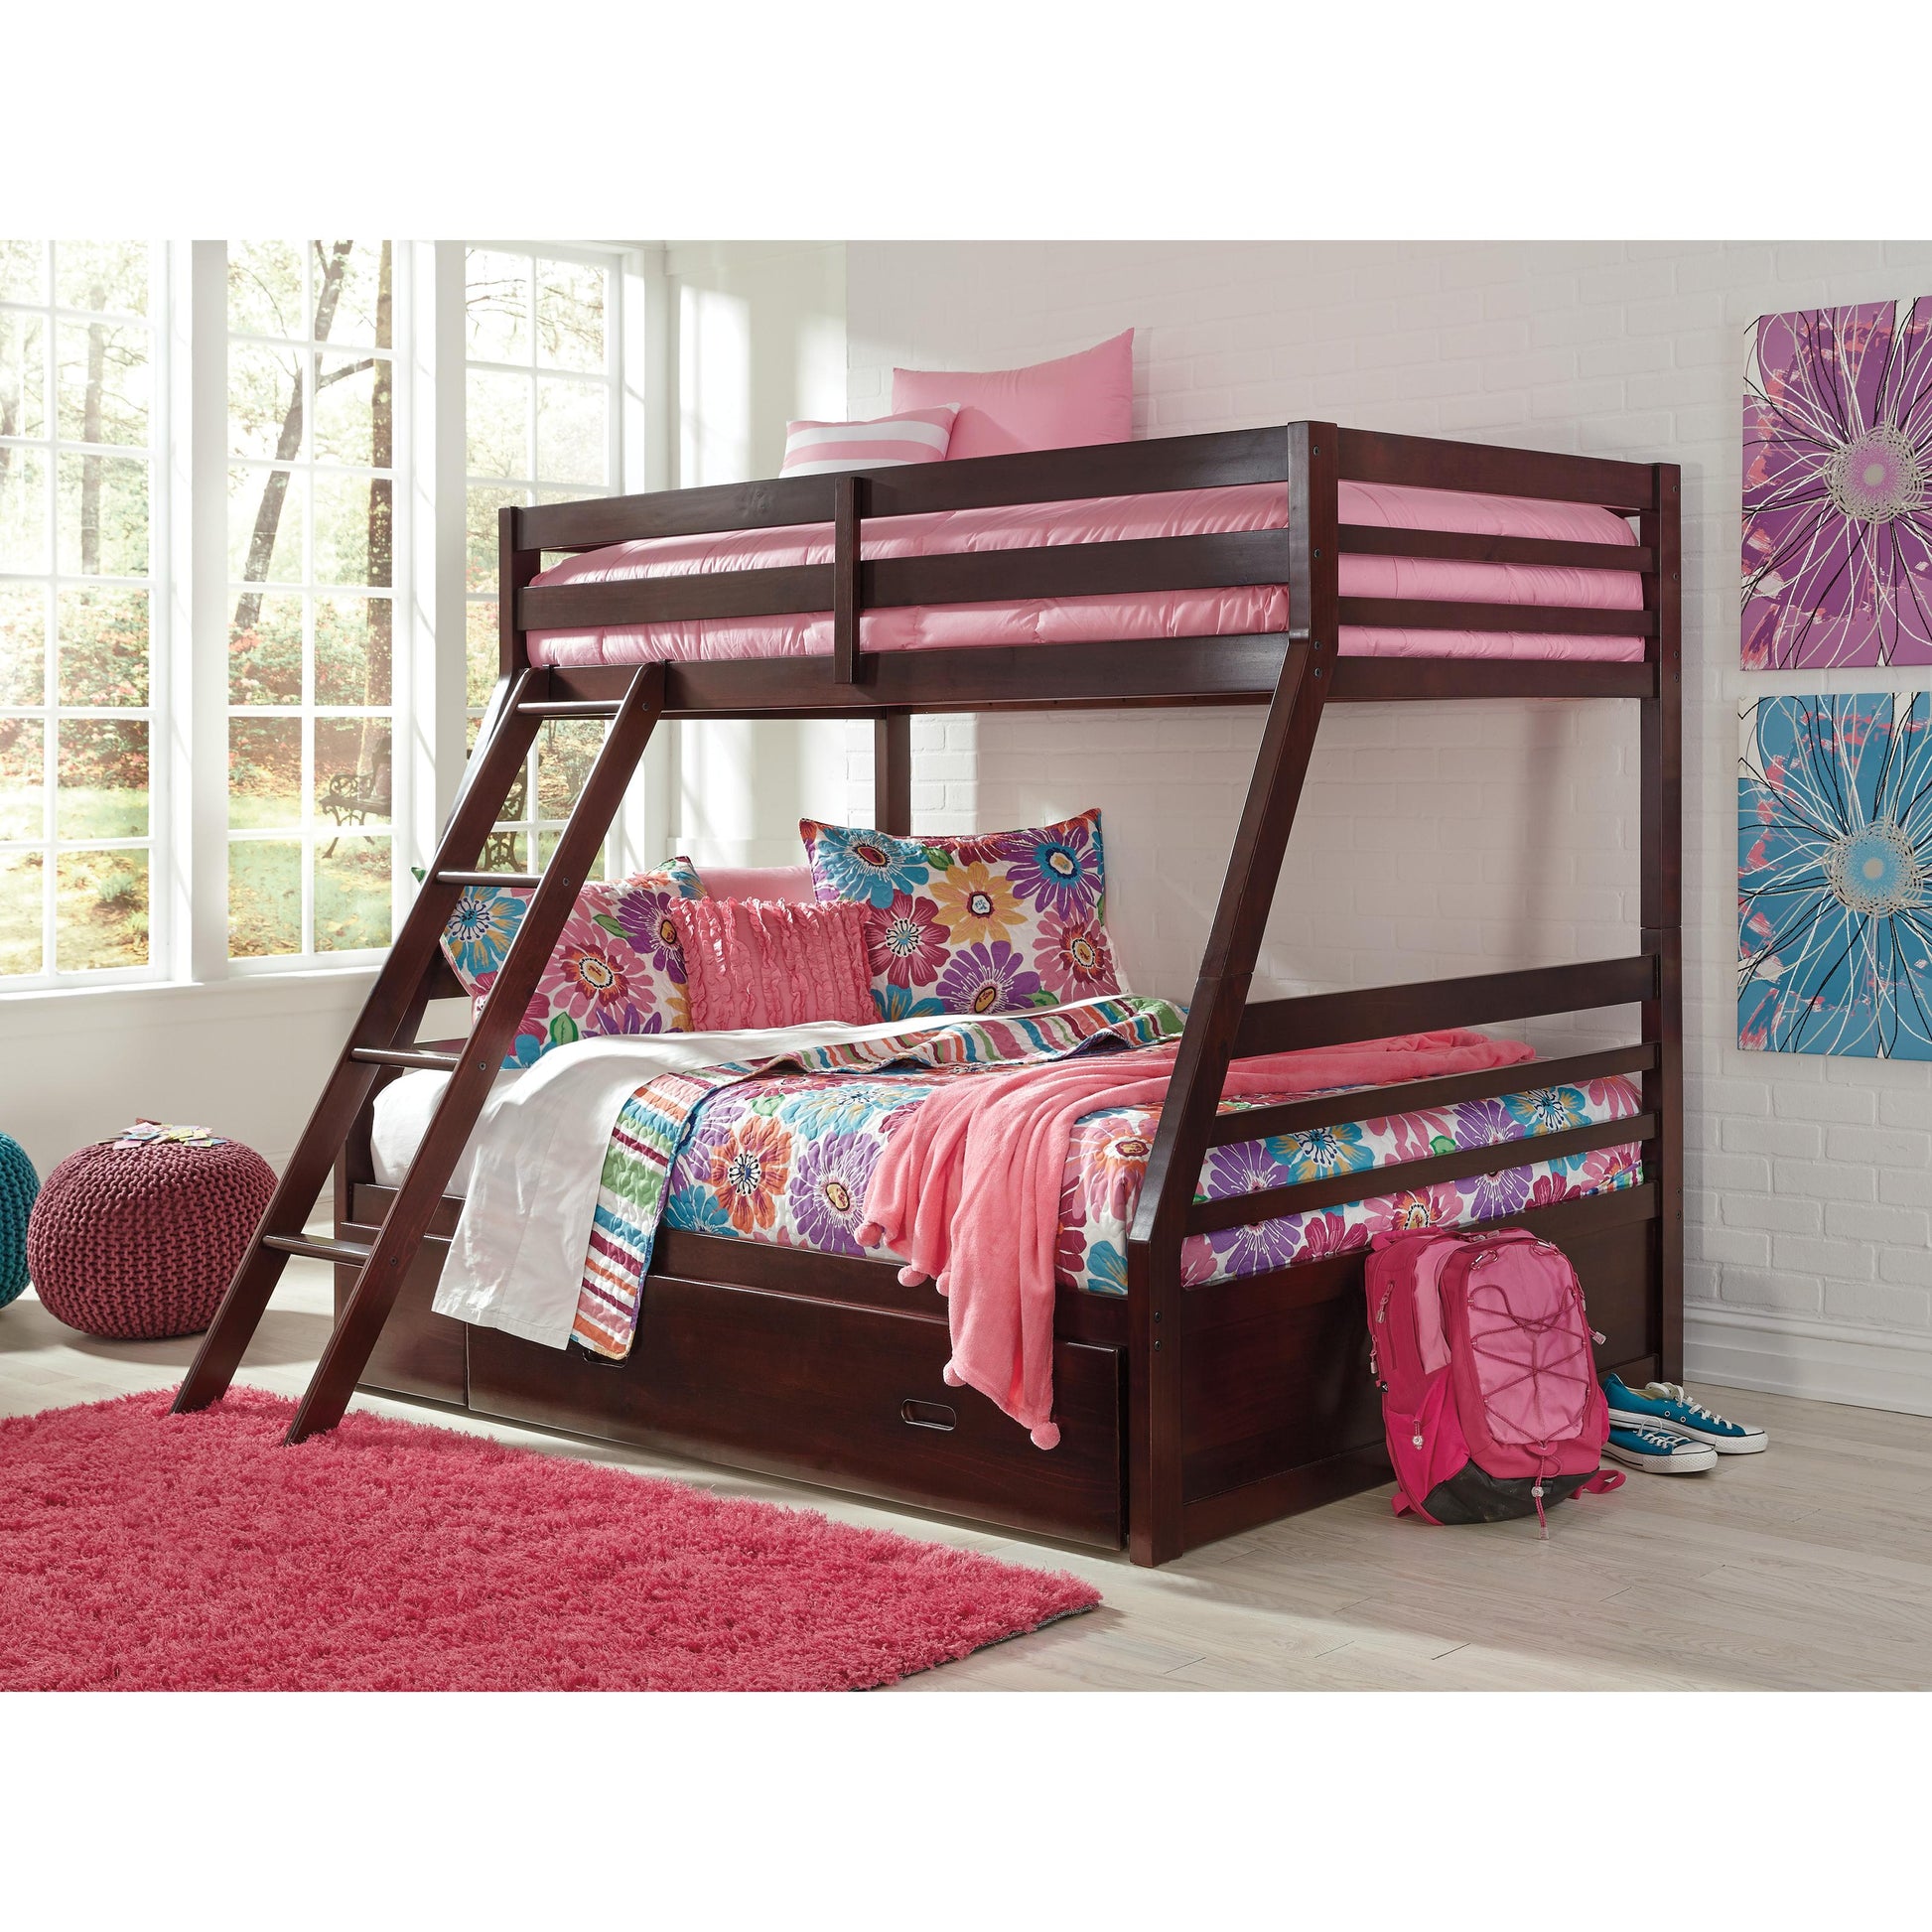 Signature Design by Ashley Kids Beds Bunk Bed B328-58P/B328-58R/B328-50 IMAGE 4